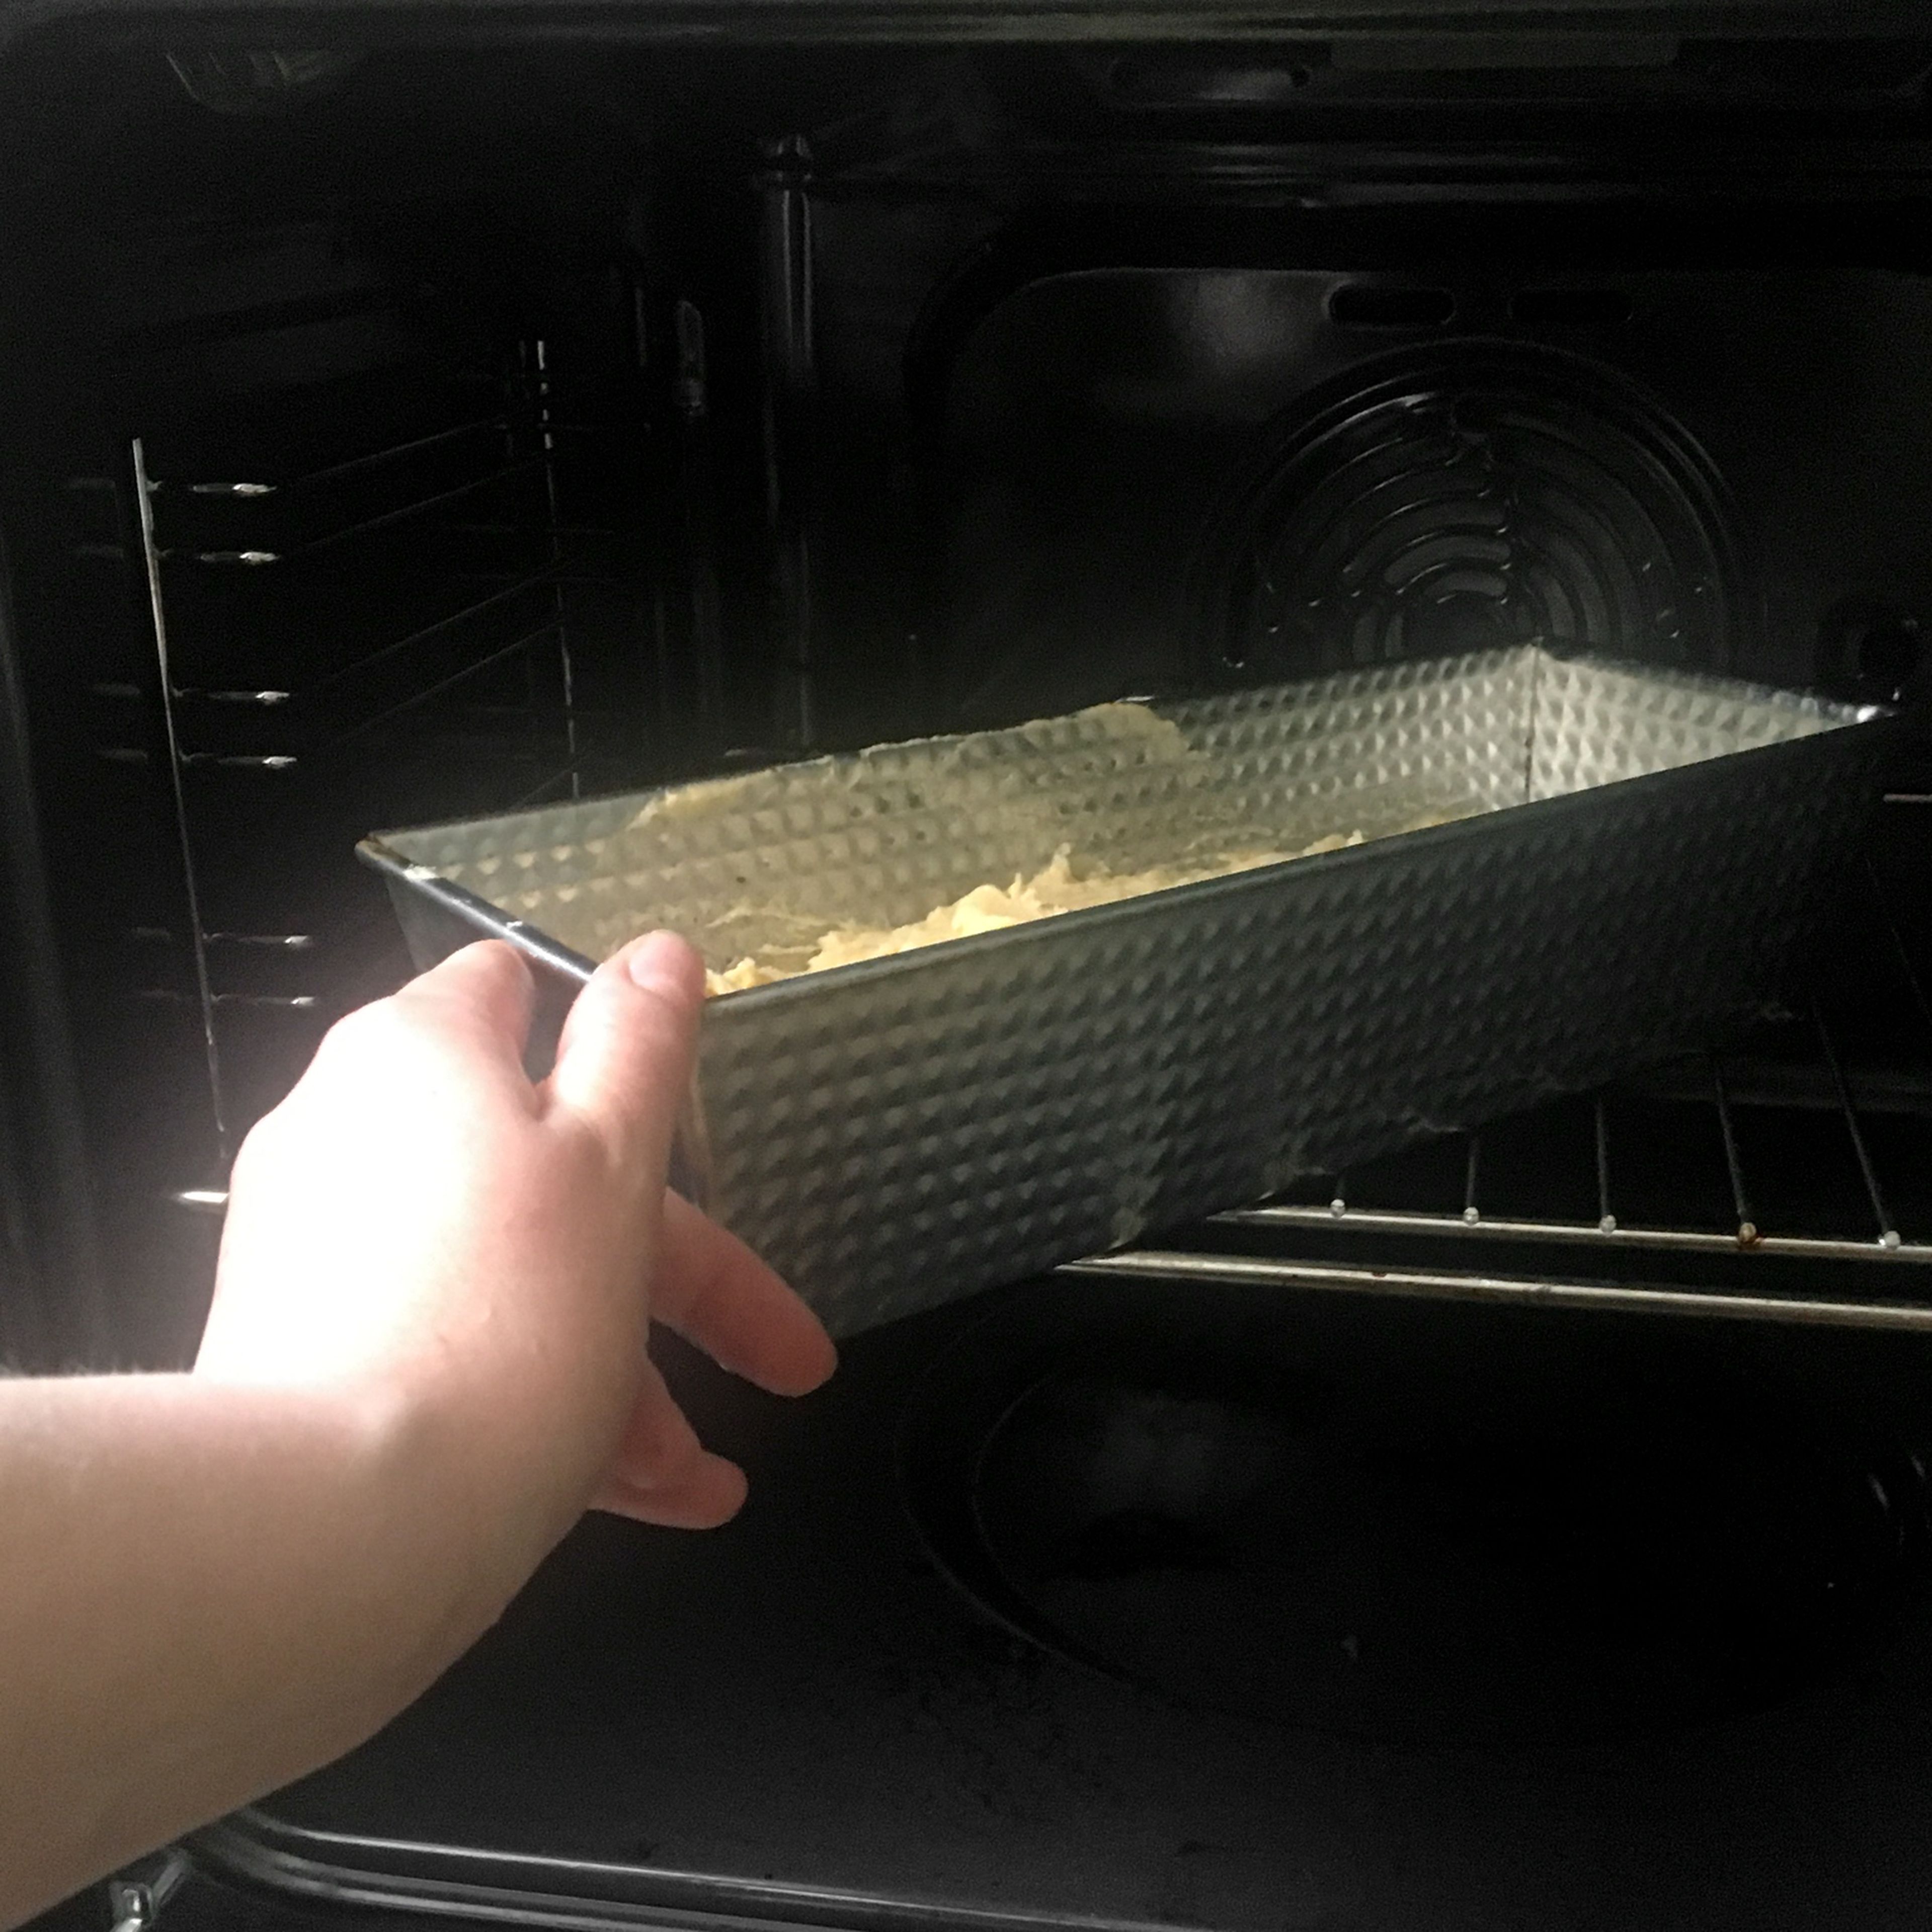 Pour batter into a loaf pan and bake for approx. 50 min., or until golden brown. Let cool slightly in the pan before transferring to a wire rack to cool completely.